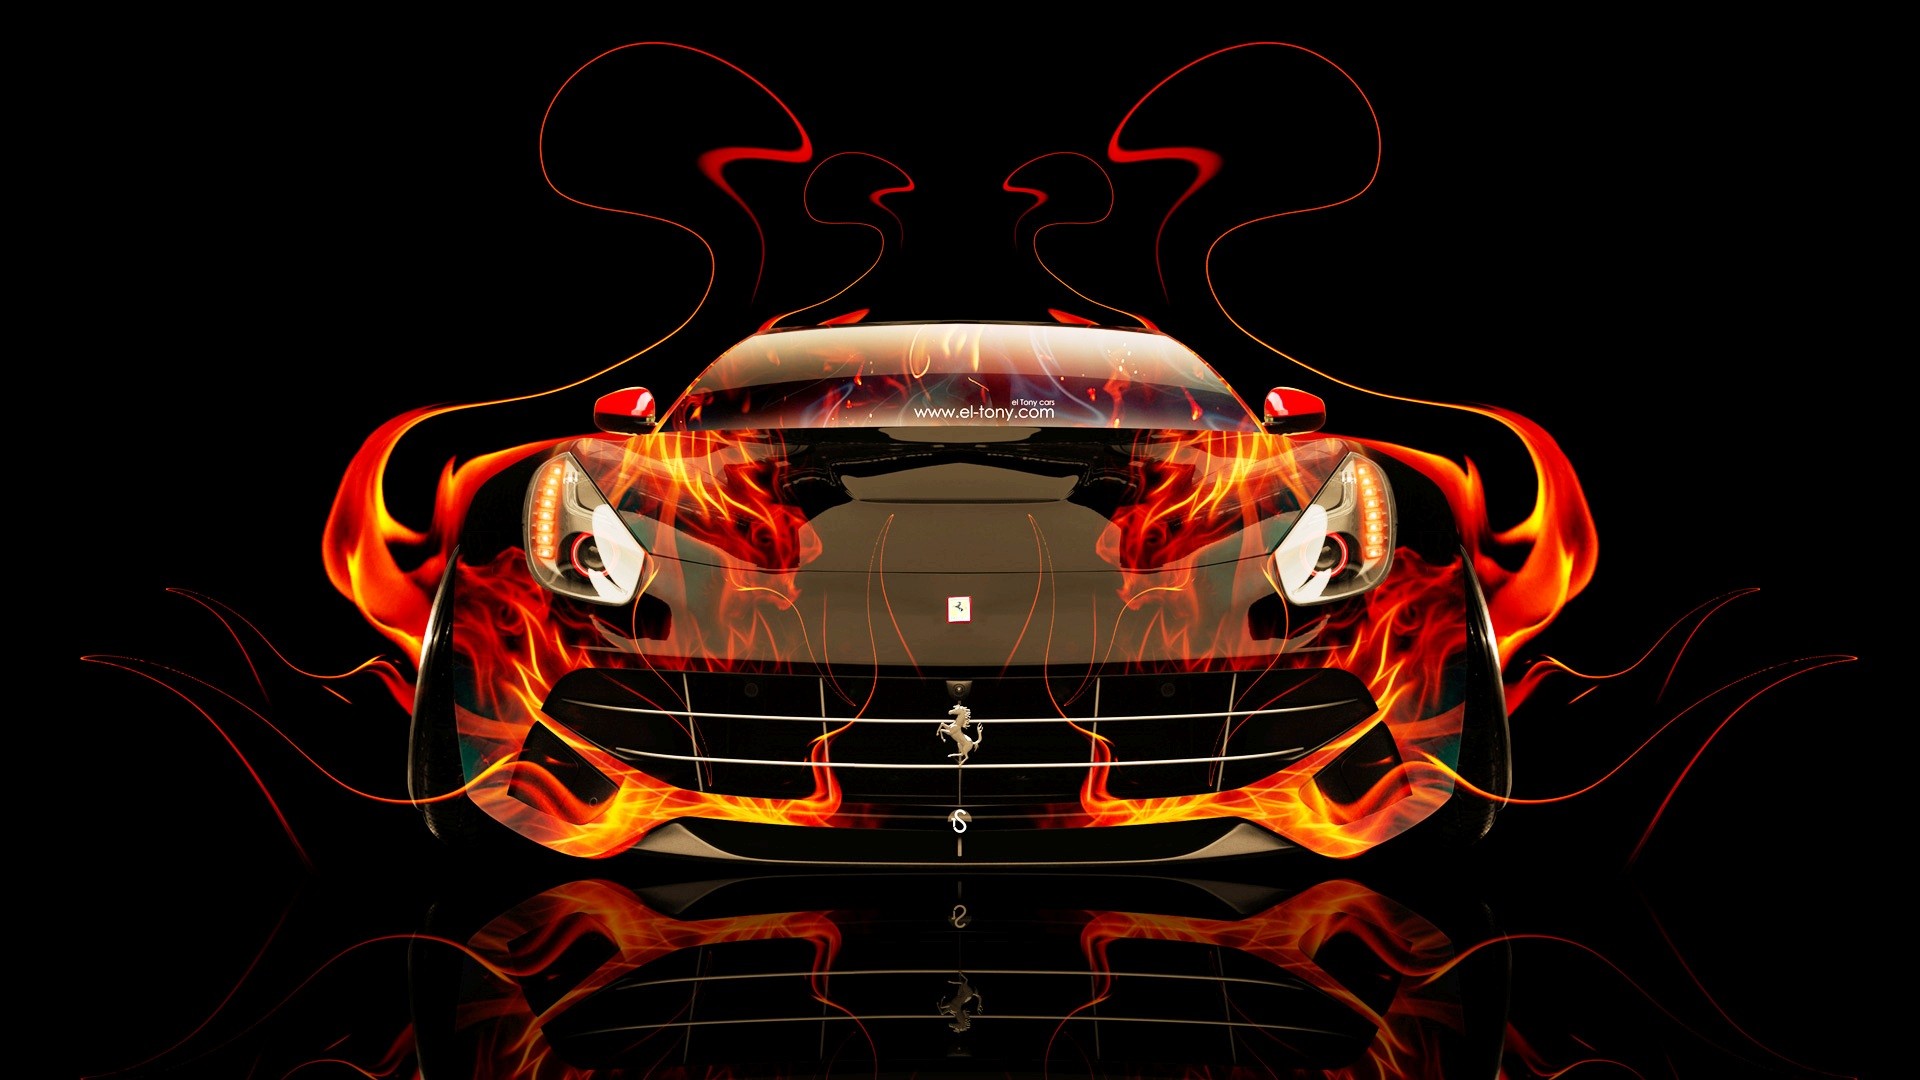 Design Talent Showcase Tony.com Brings Sensual Elements Fire And Water To YOUR Car Wallpaper 9